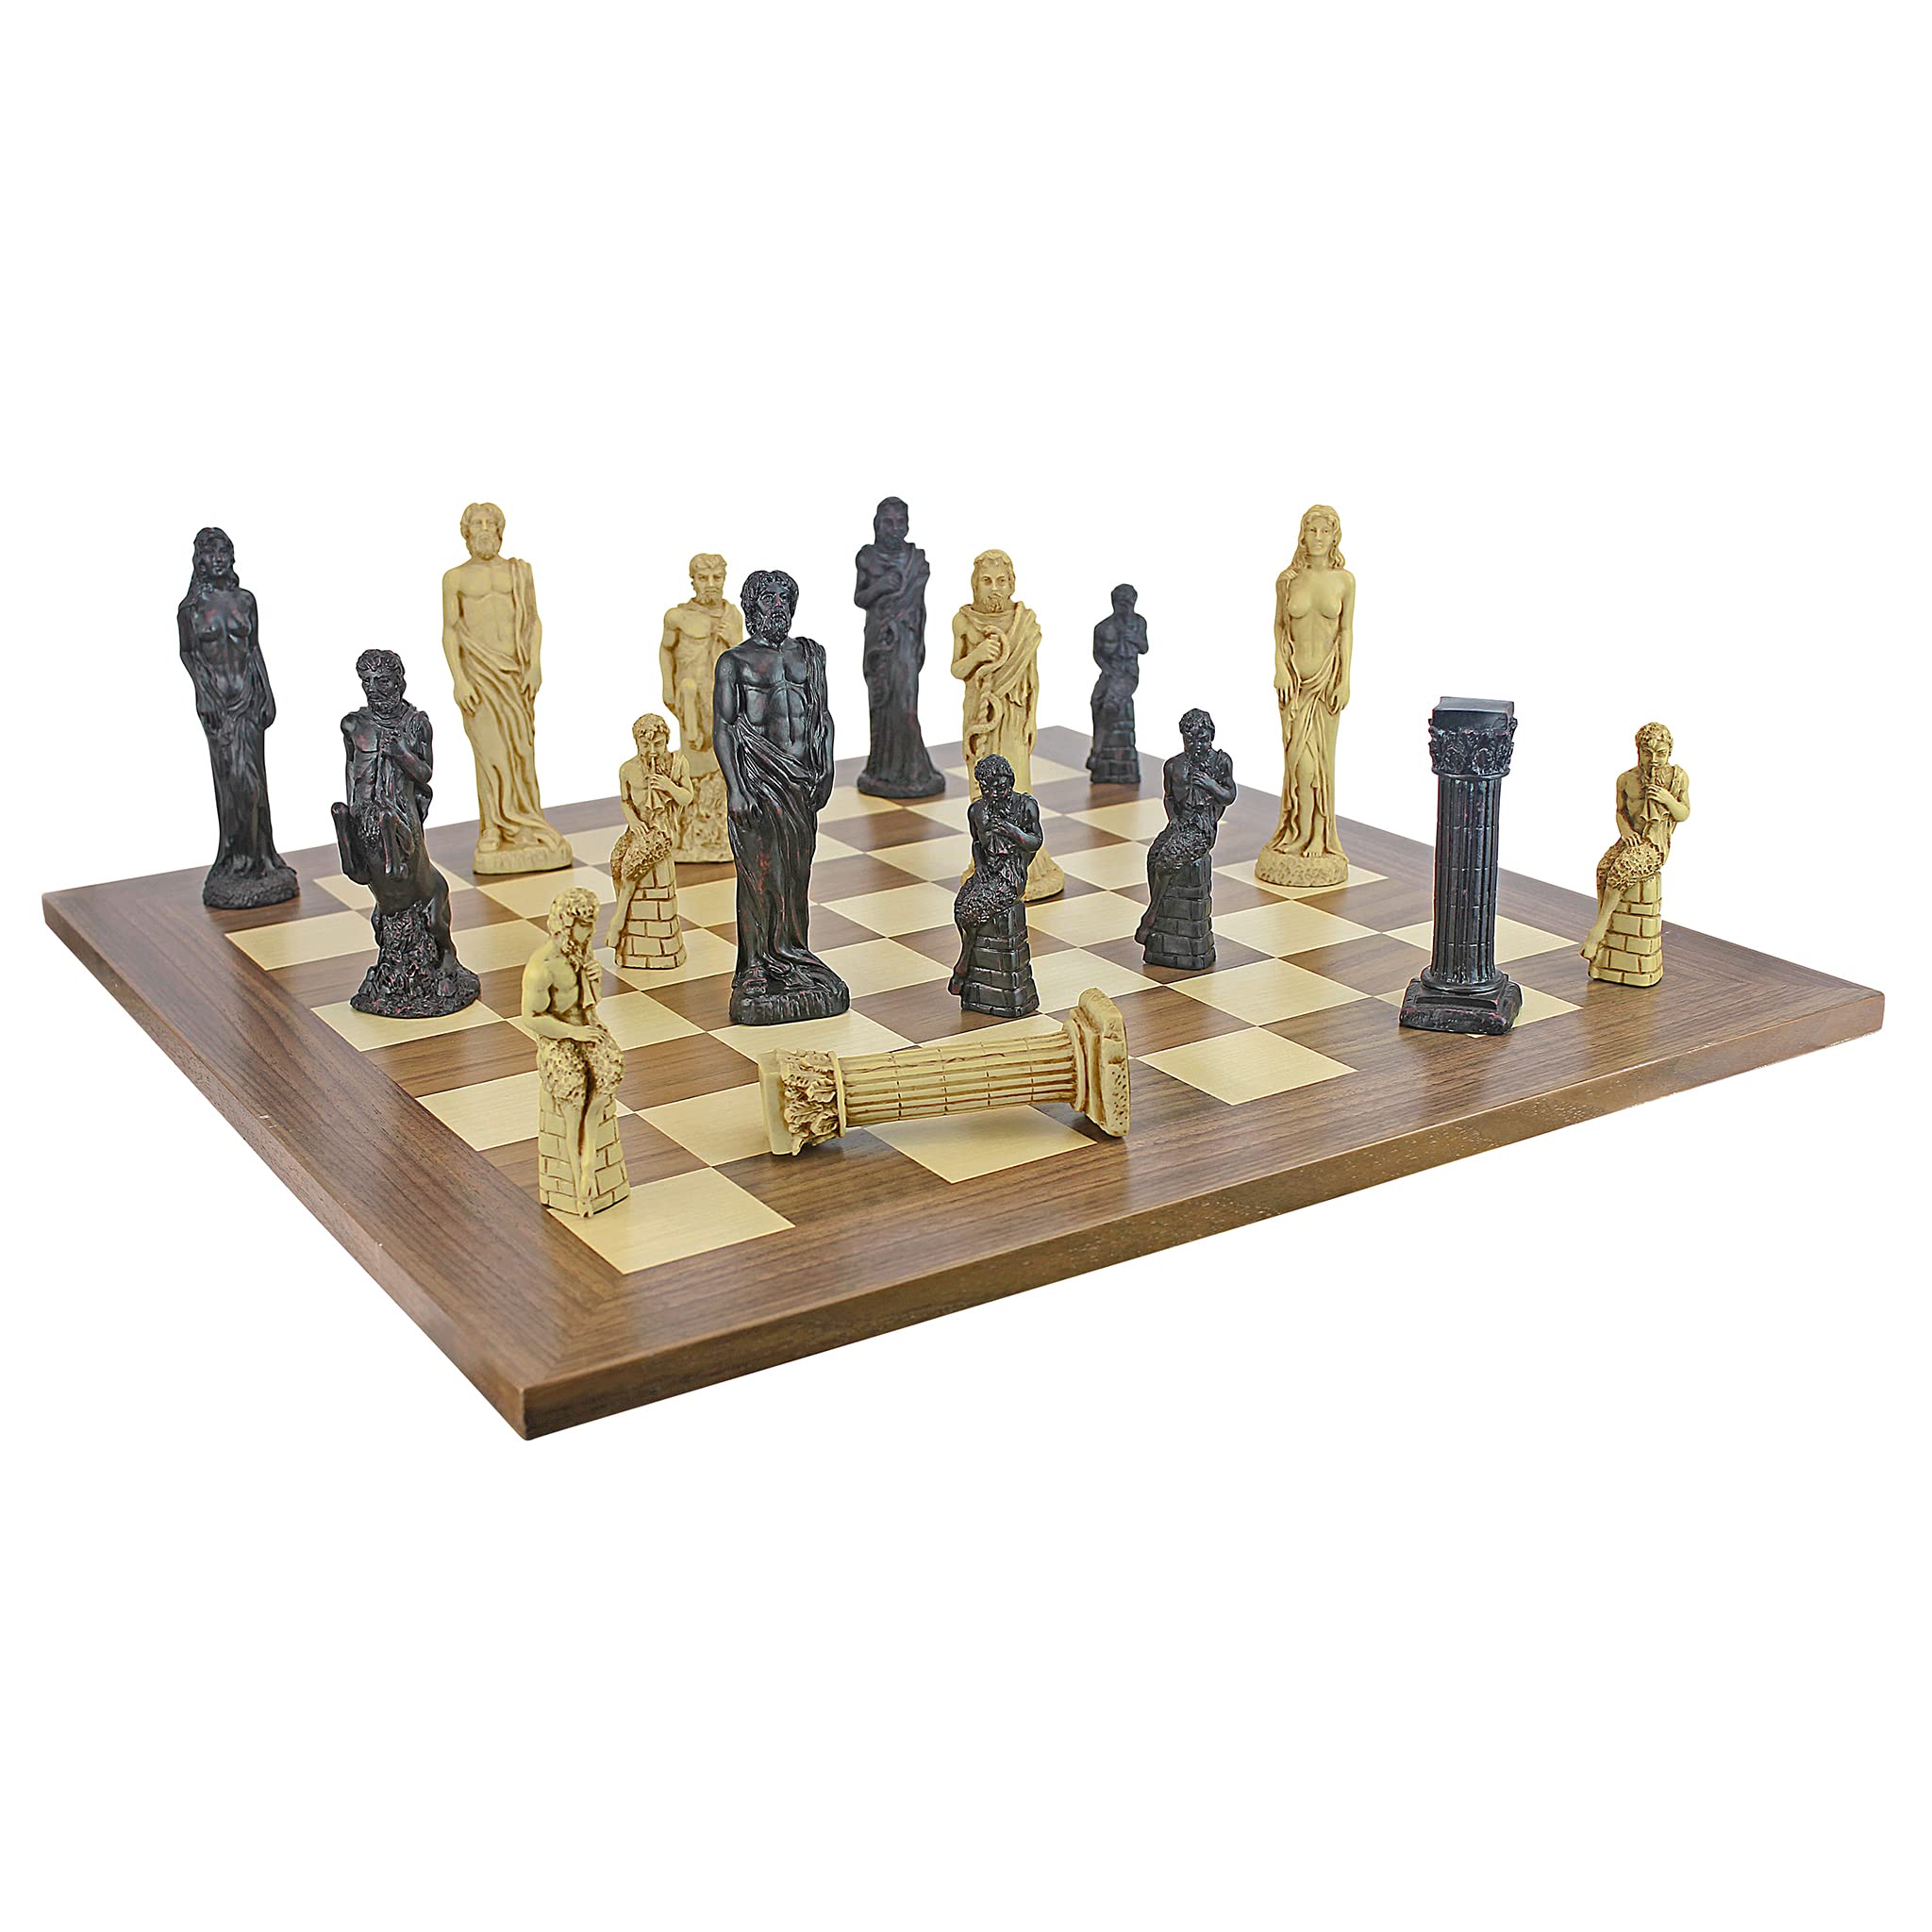 Design Toscano Gods of Greek Mythology Complete Chess Set, 6 Inch, 16 Pieces and Board, Two Tone Stone